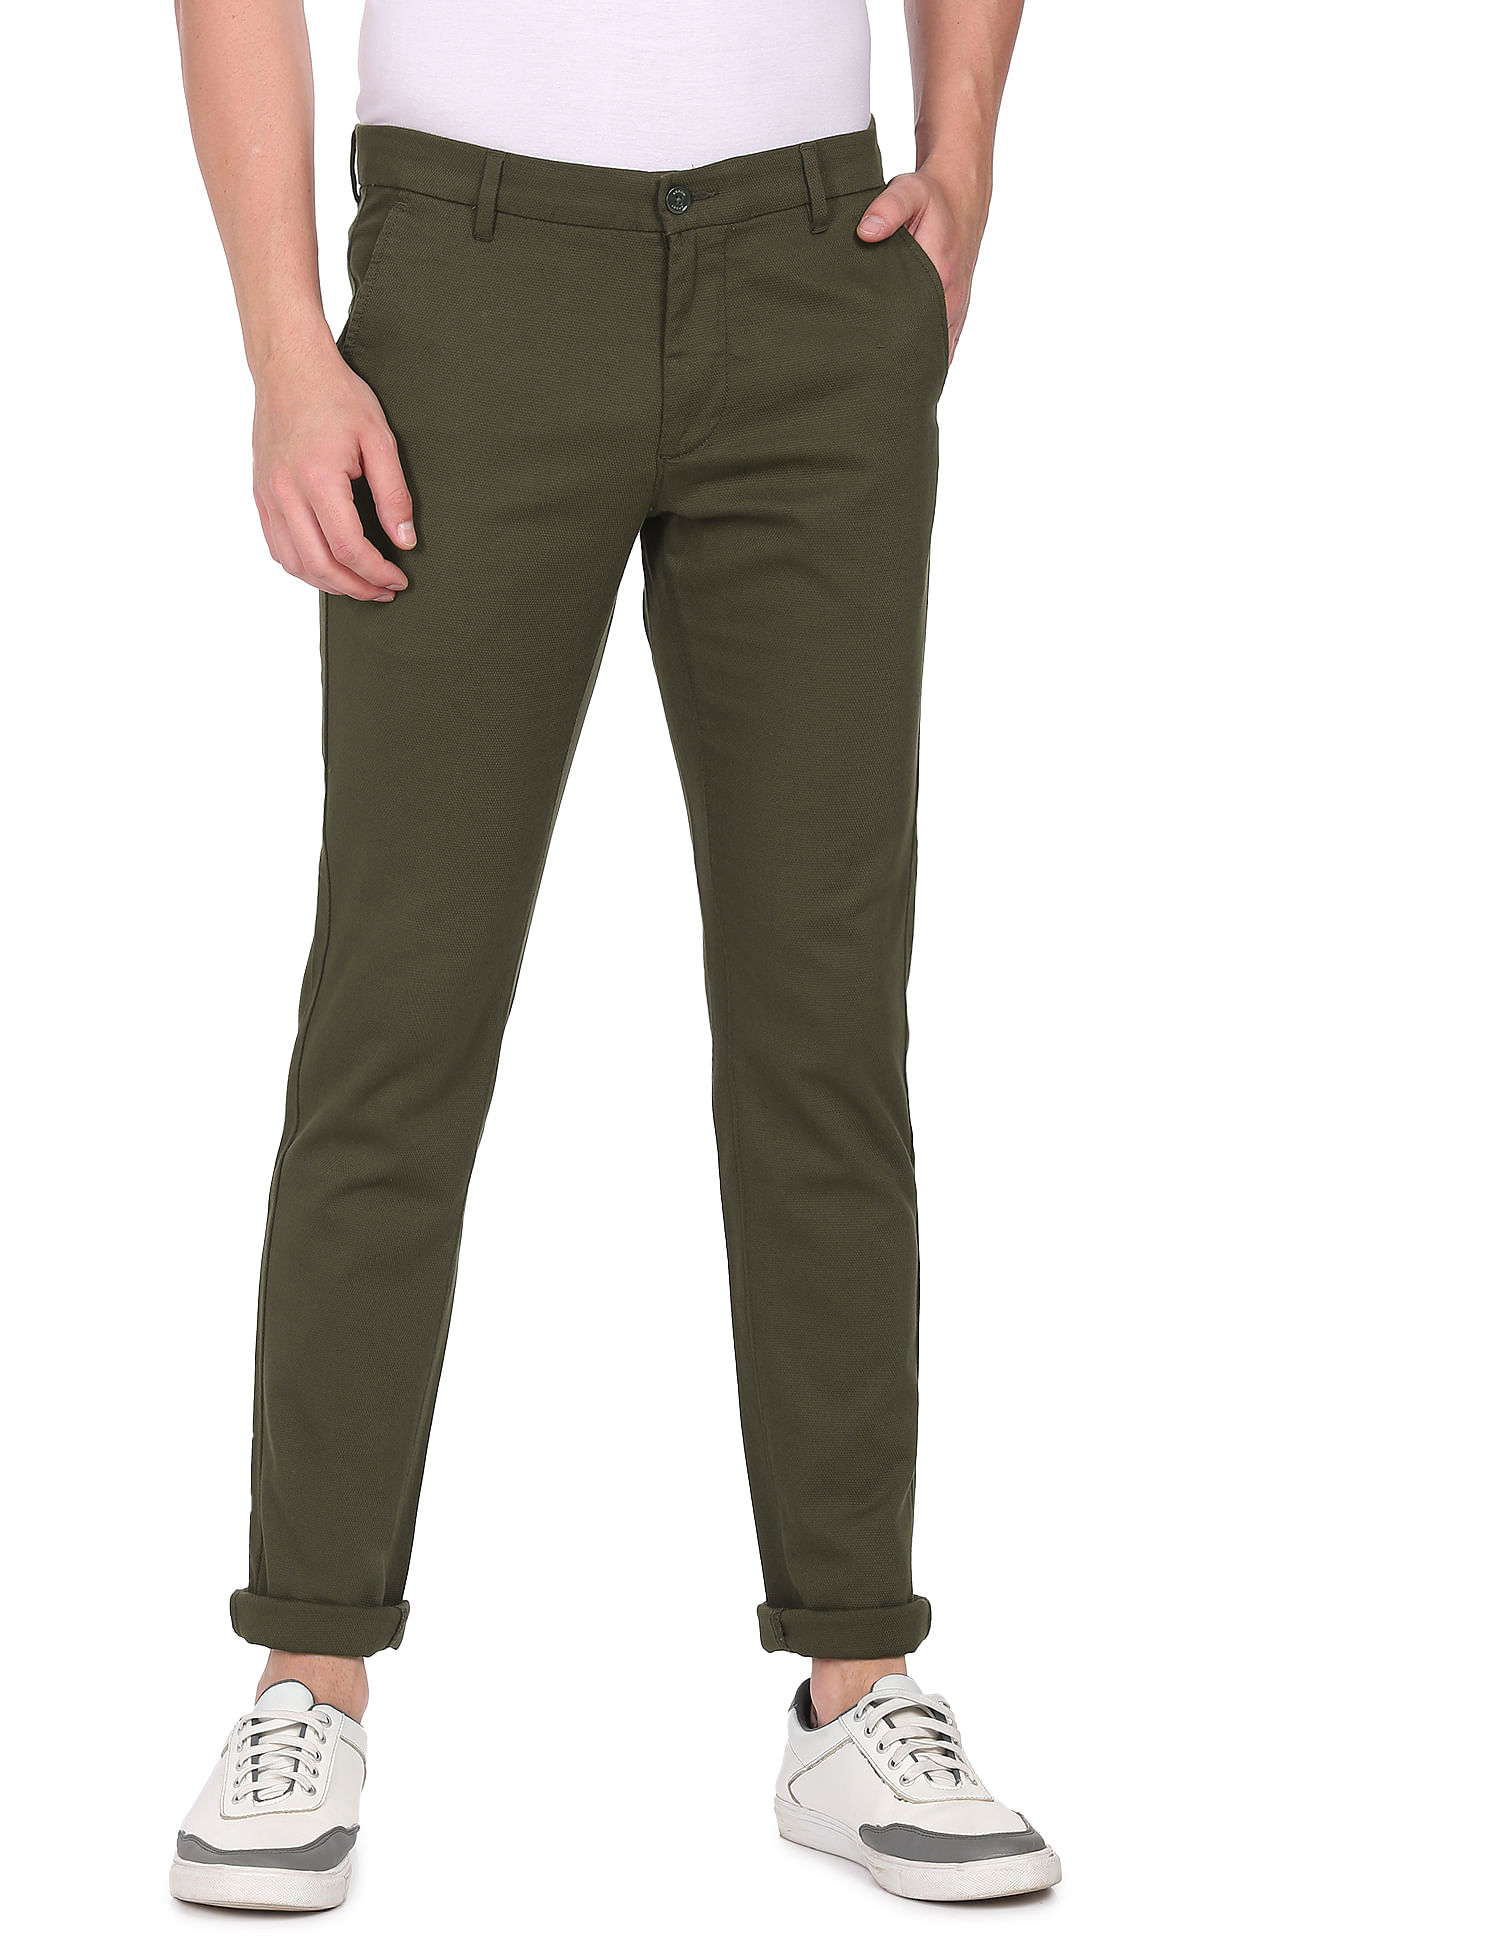 Buy Octave Men Olive Green Trousers at Amazon.in